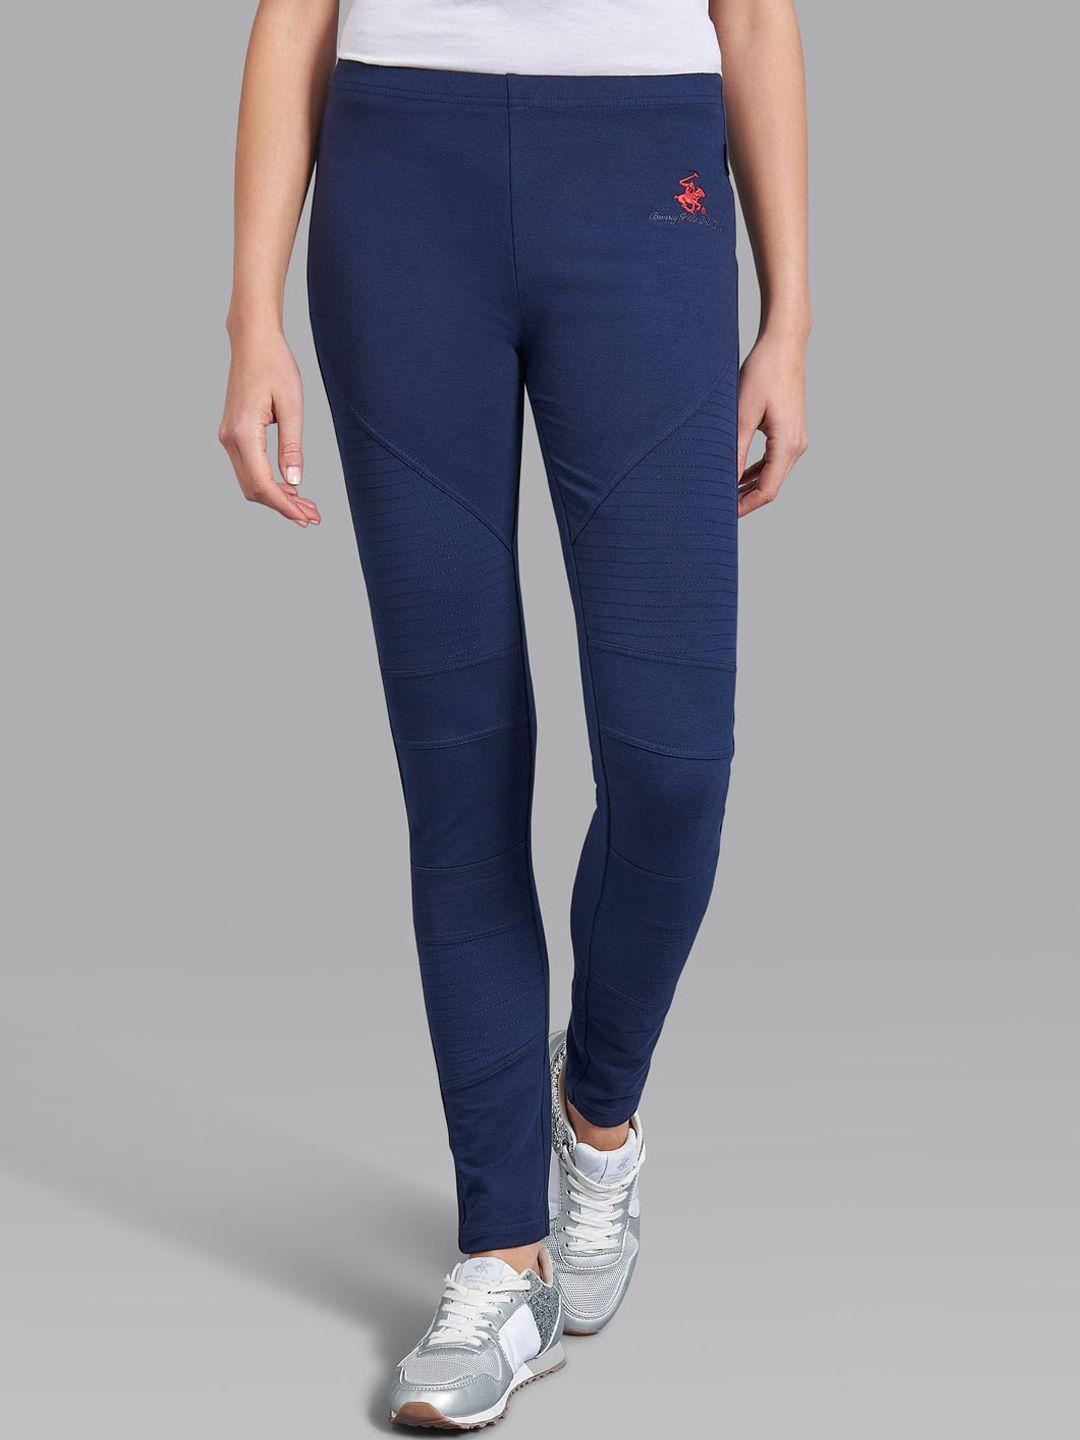 beverly hills polo club women navy blue solid leggings